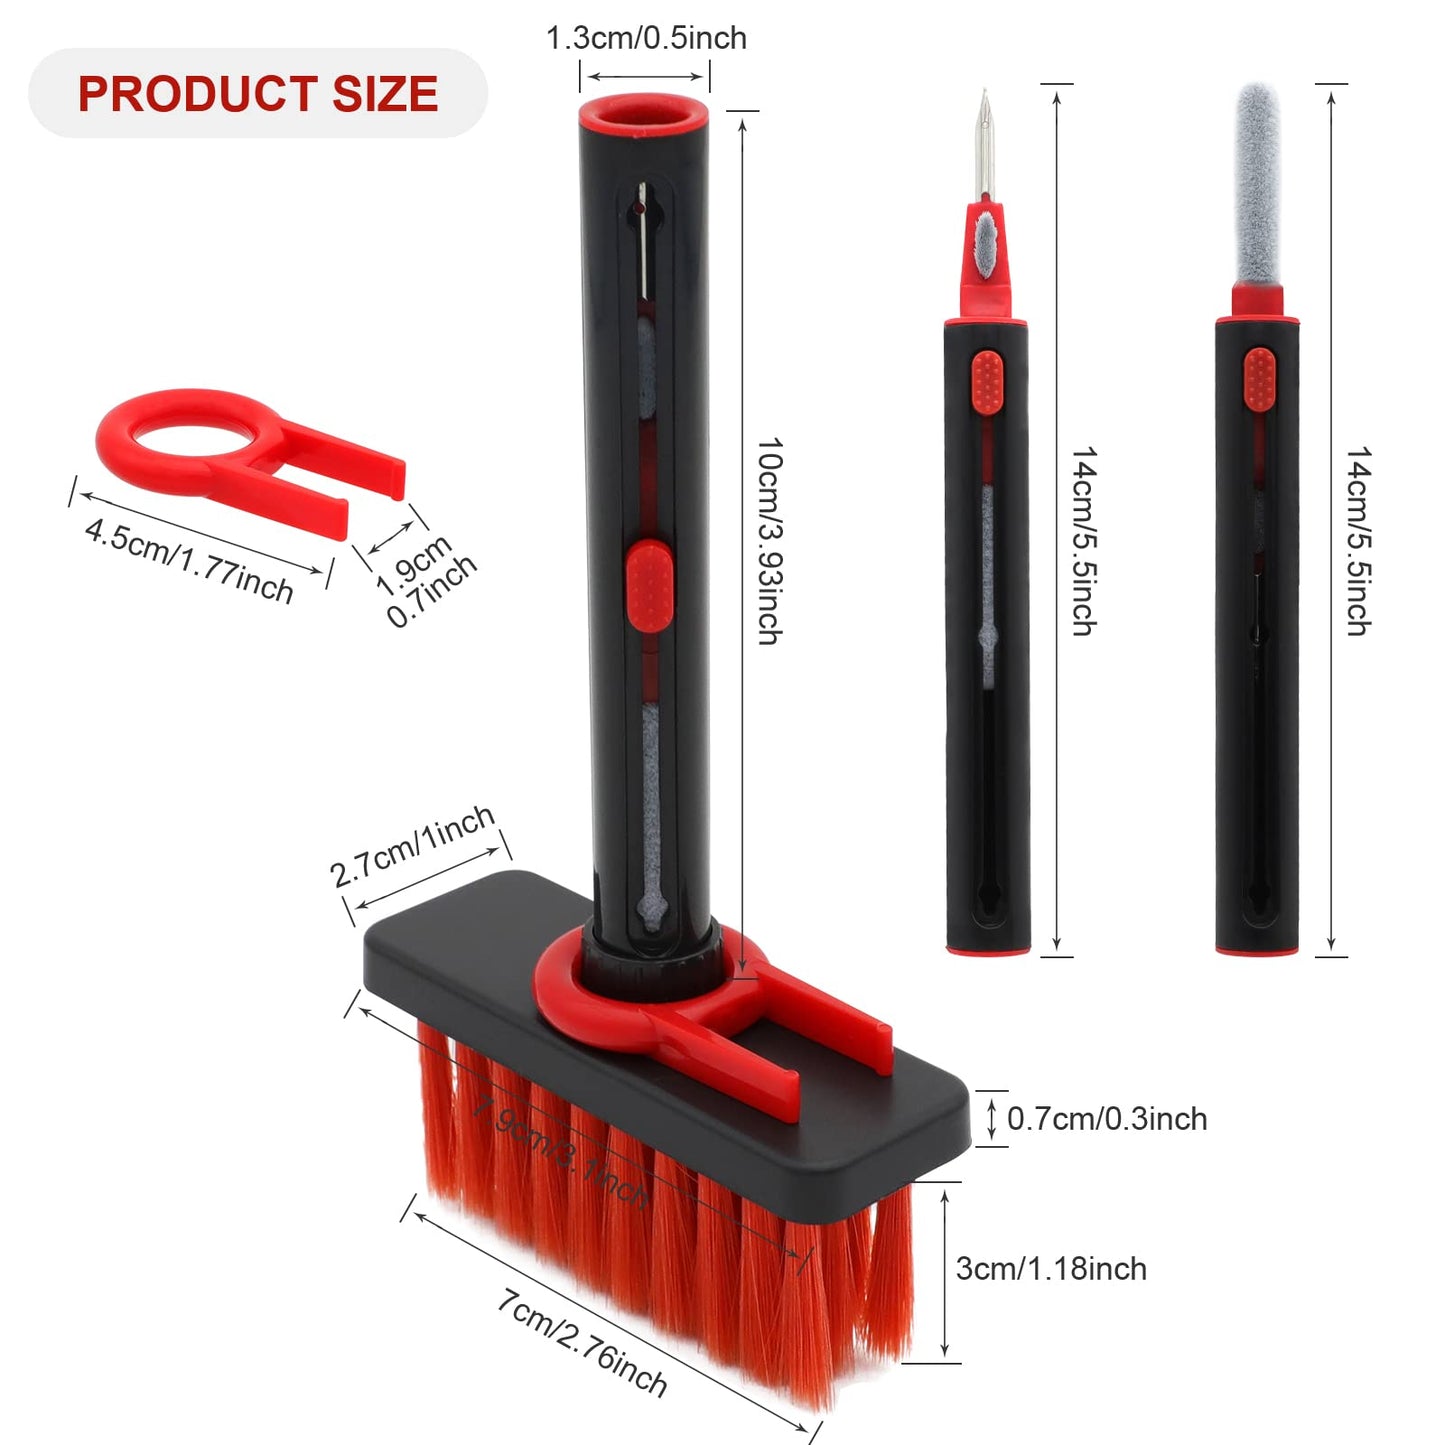 5 in 1 Keyboard Cleaning Brush Kit Keycap Puller Earbuds Cleaner for Airpods Pro 1 2 3 Bluetooth Earphones Case Cleaning Tools